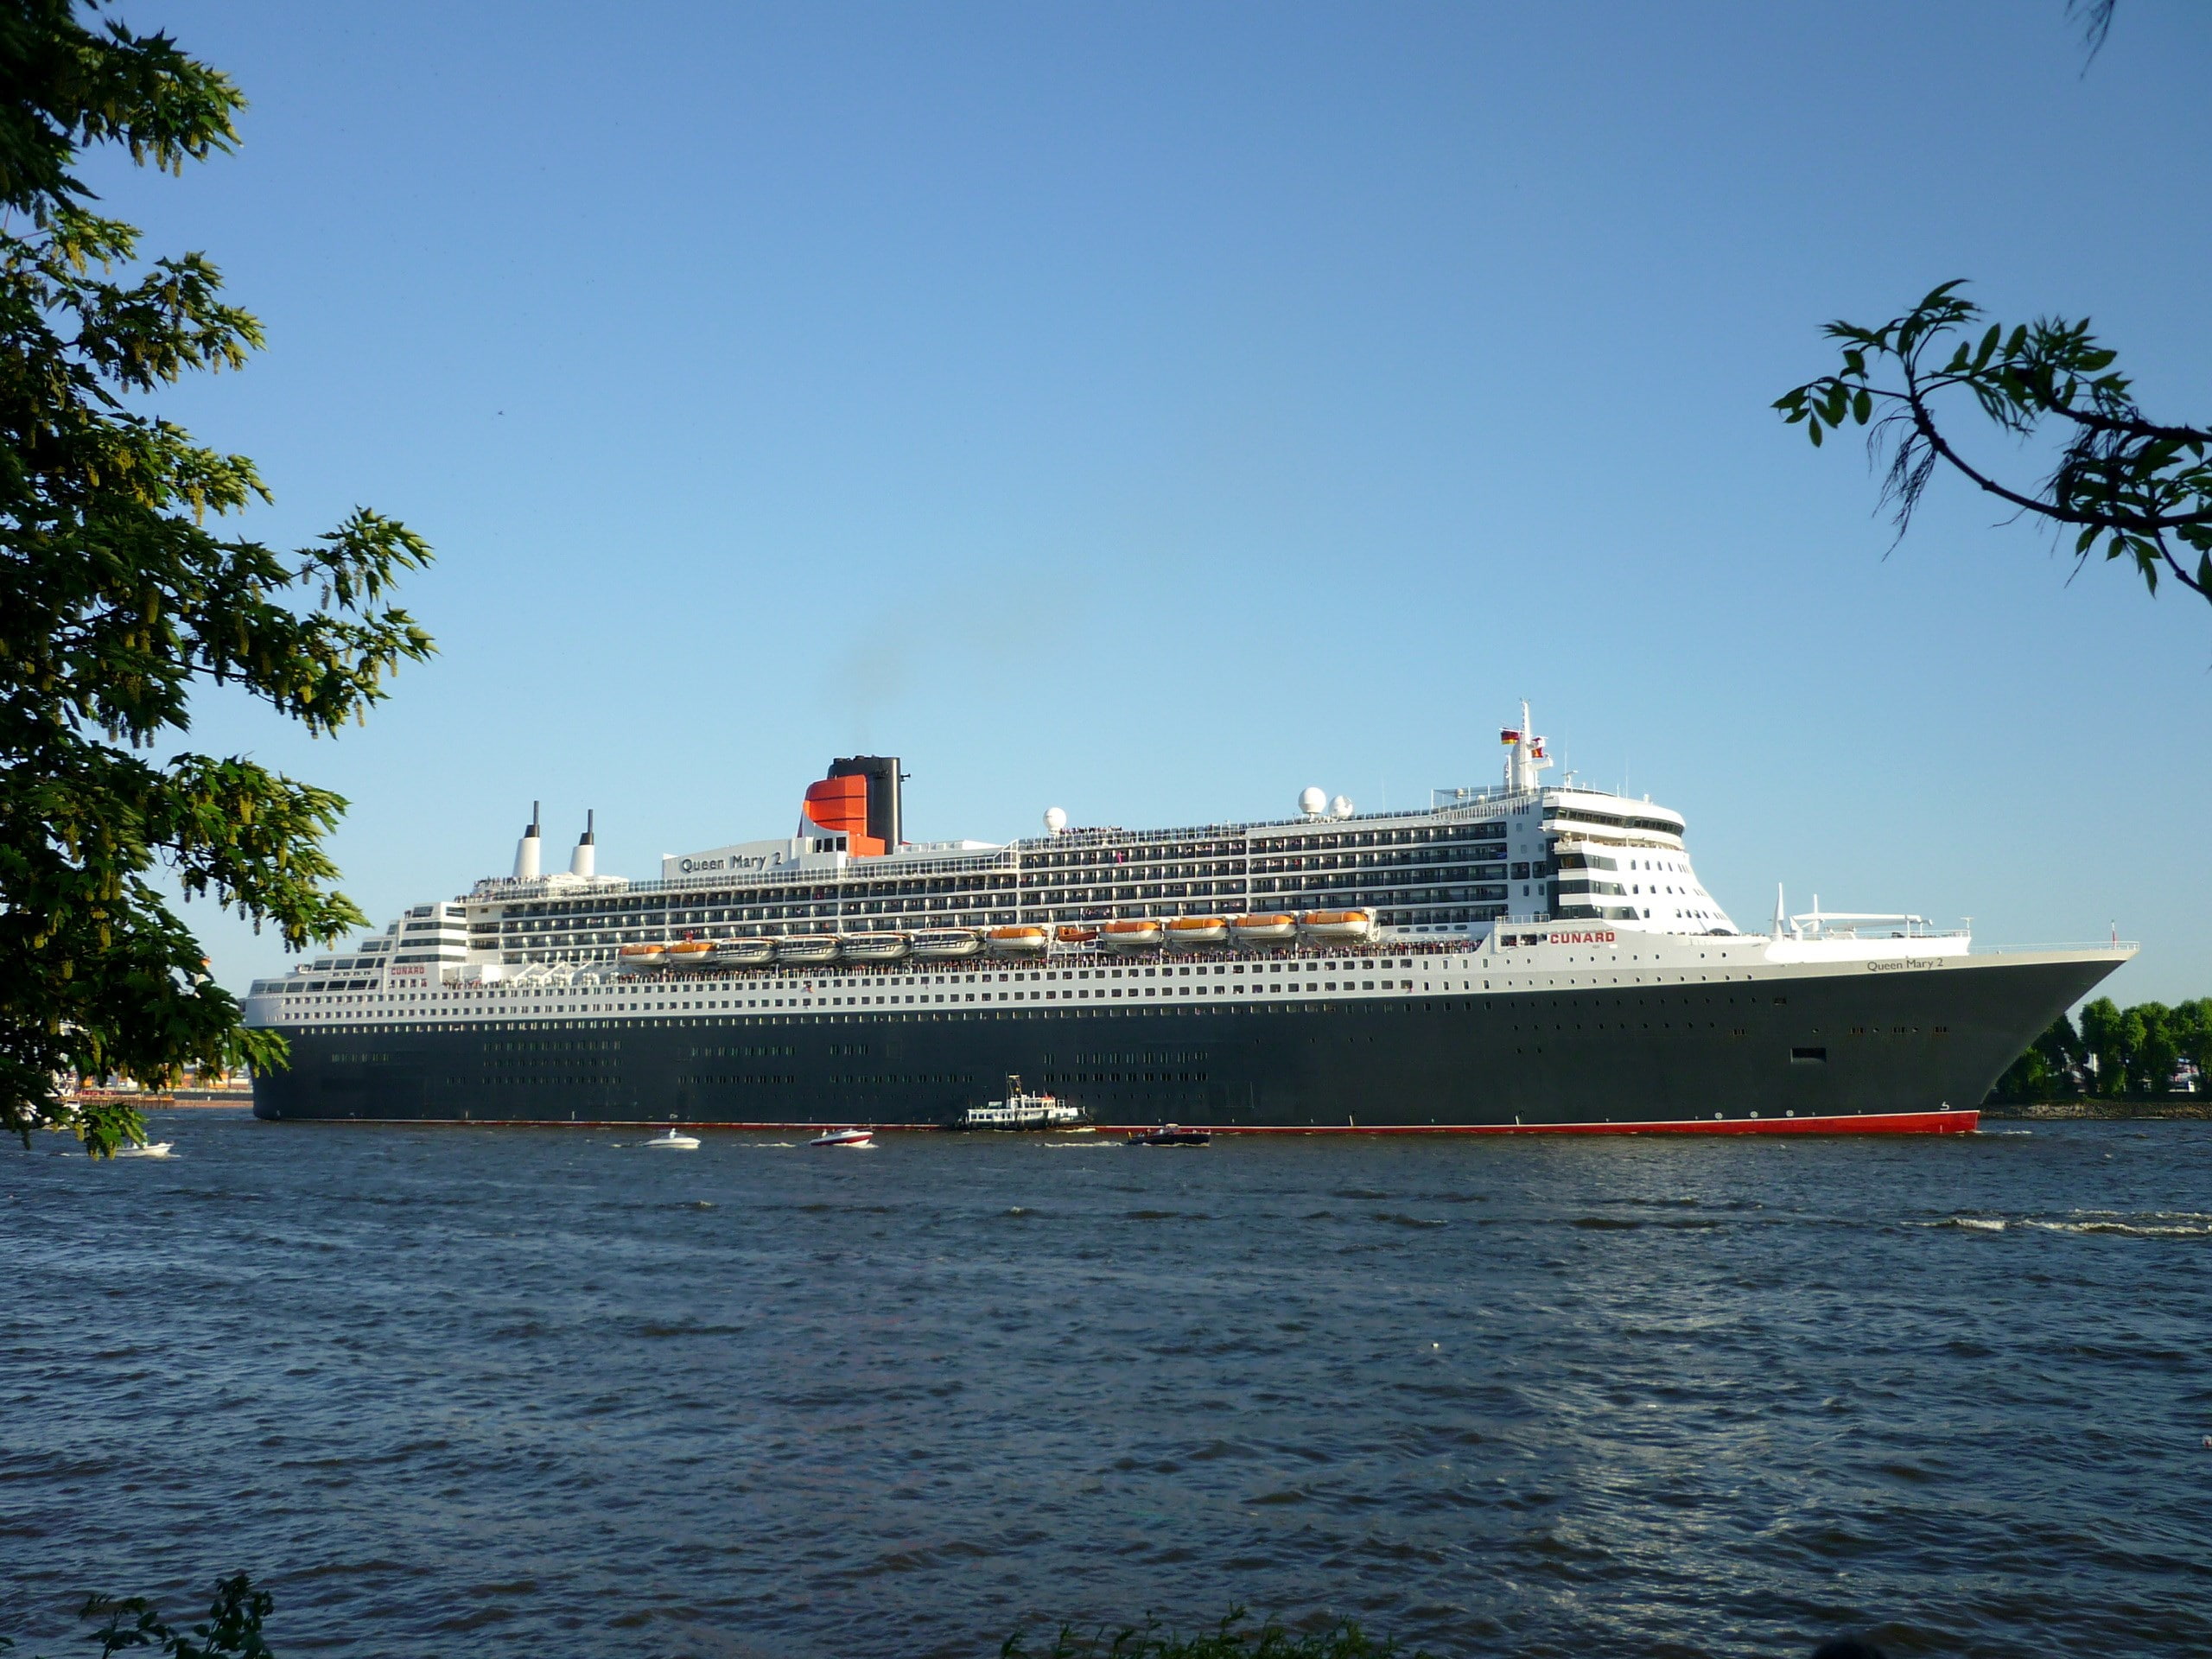 rms queen mary 2